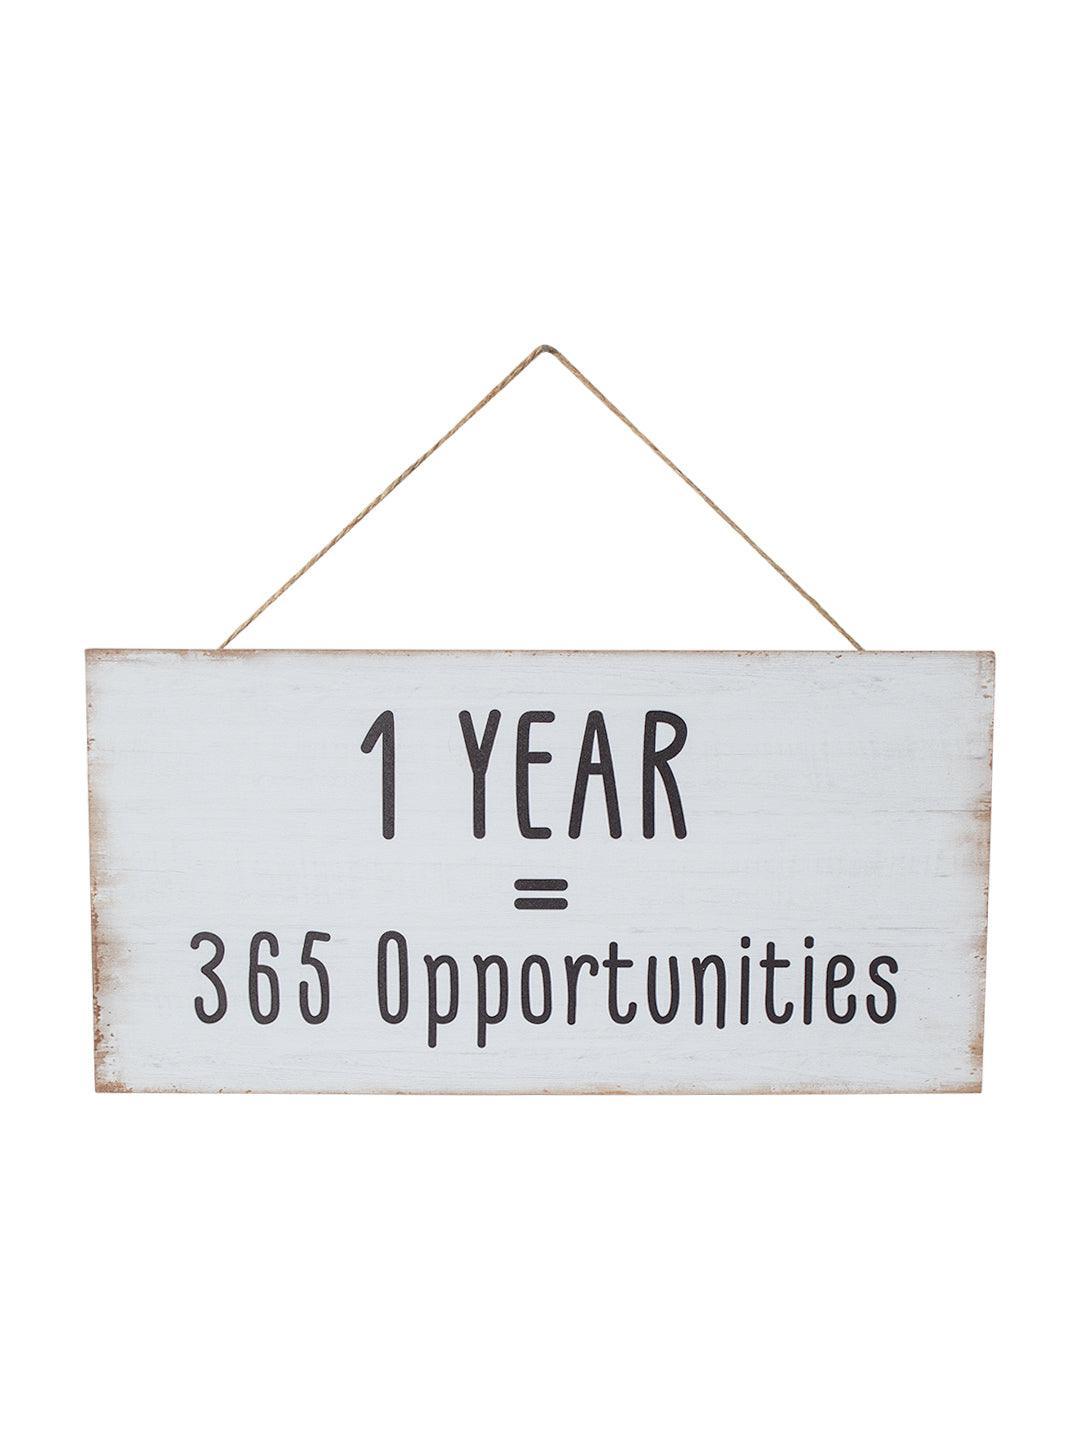 1 YEAR = 365 Opportunities - Wall Hanging Plaque - MARKET 99